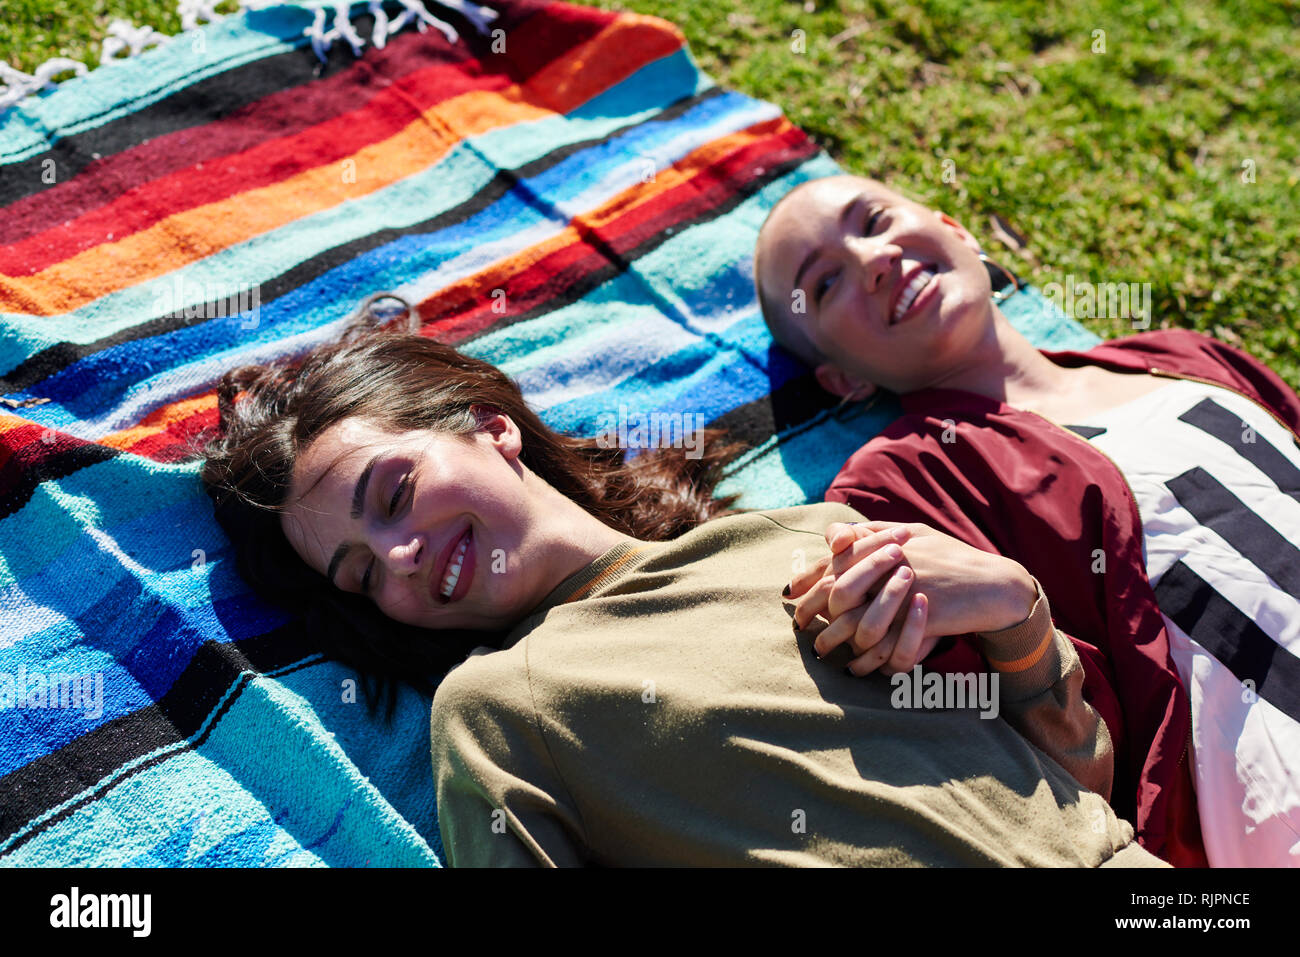 Two young female friends lying on picnic blanket in park, Los Angeles, California, USA Stock Photo